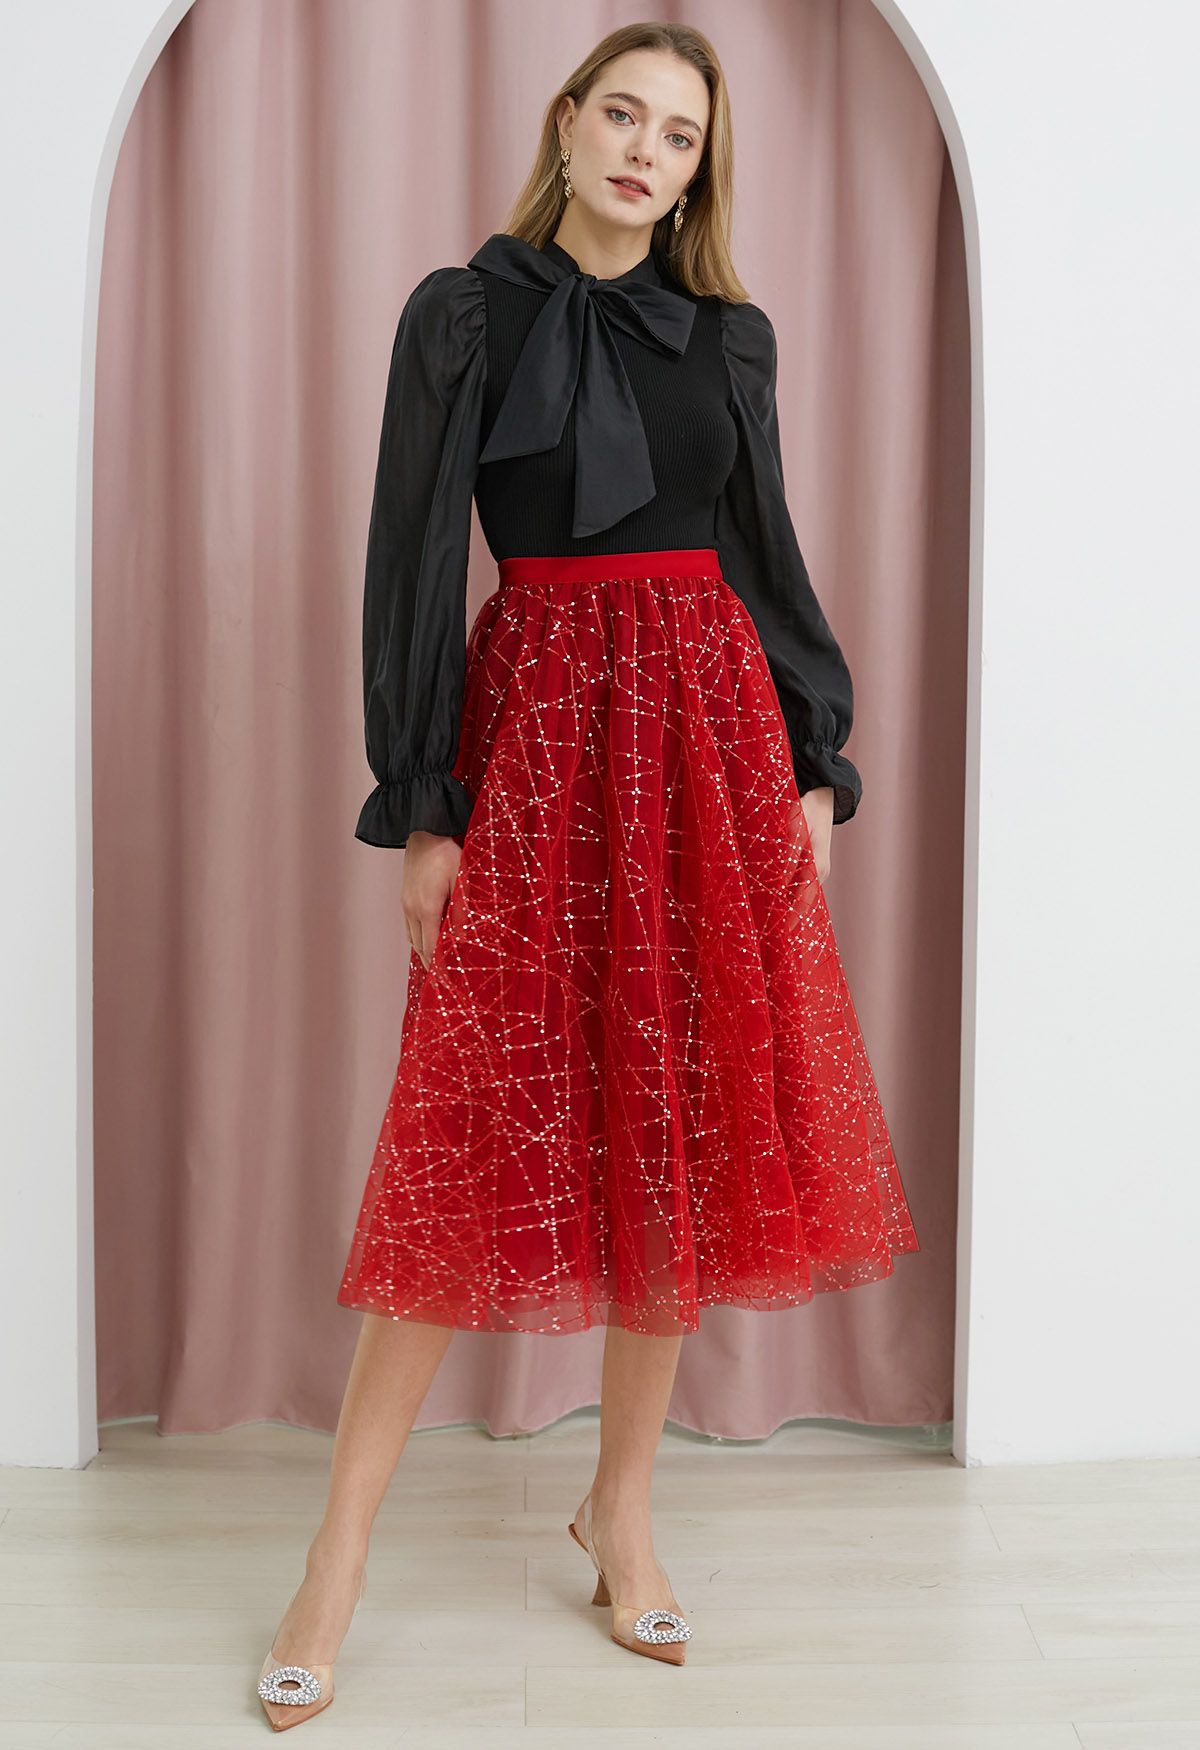 Sequined Embroidery Double-Layered Mesh Tulle Midi Skirt in Red